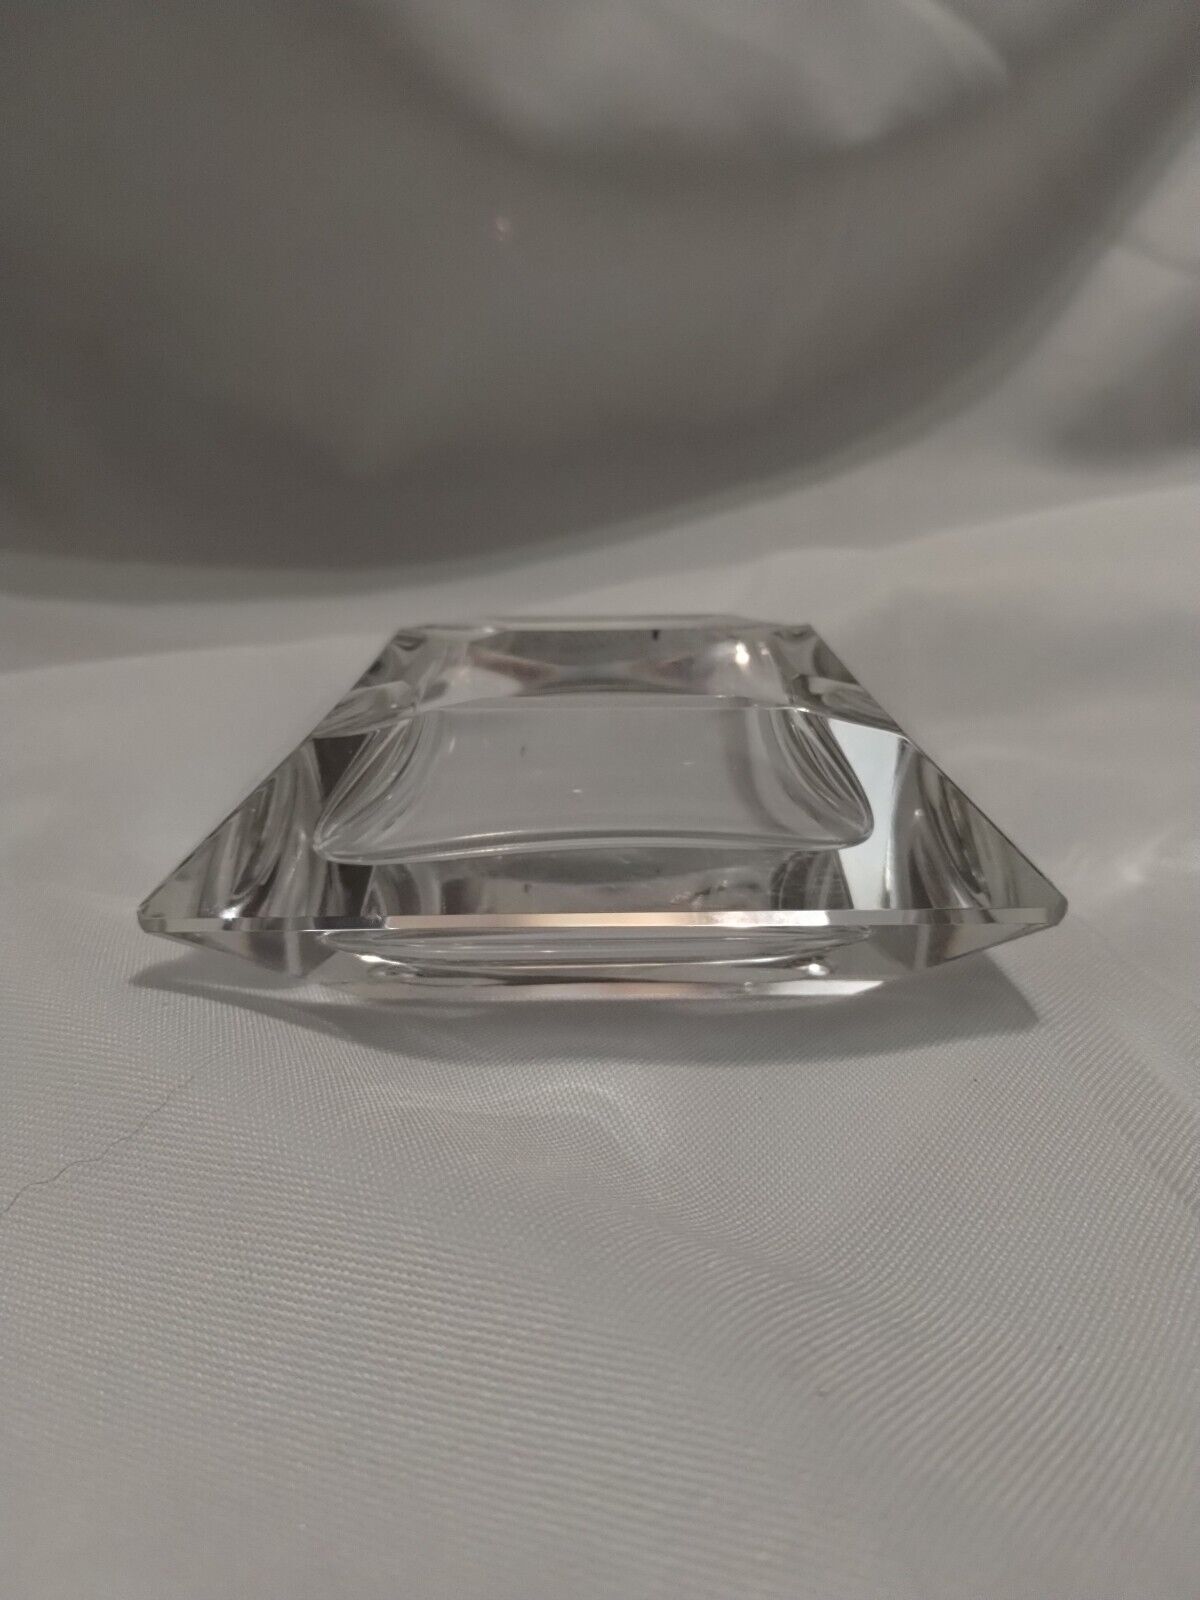 Vintage 1920s Art Deco Crystal Ashtray Made In Germany